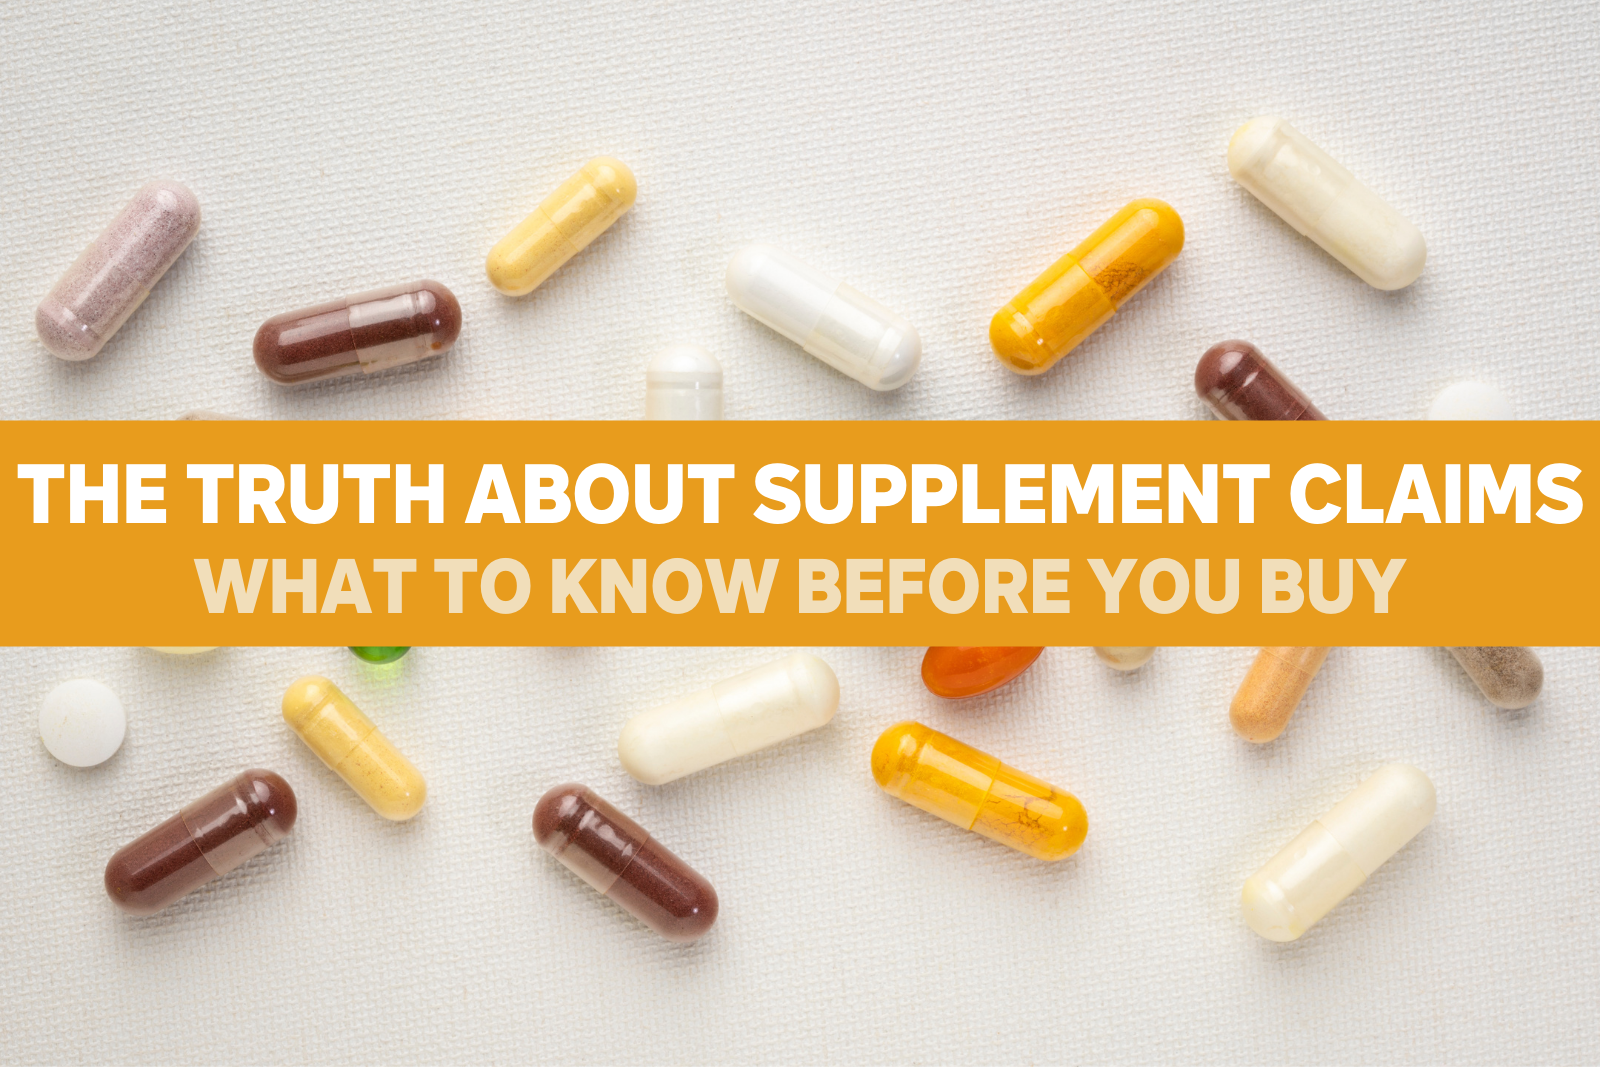 The Truth About Supplement Claims: What to Know Before You Buy